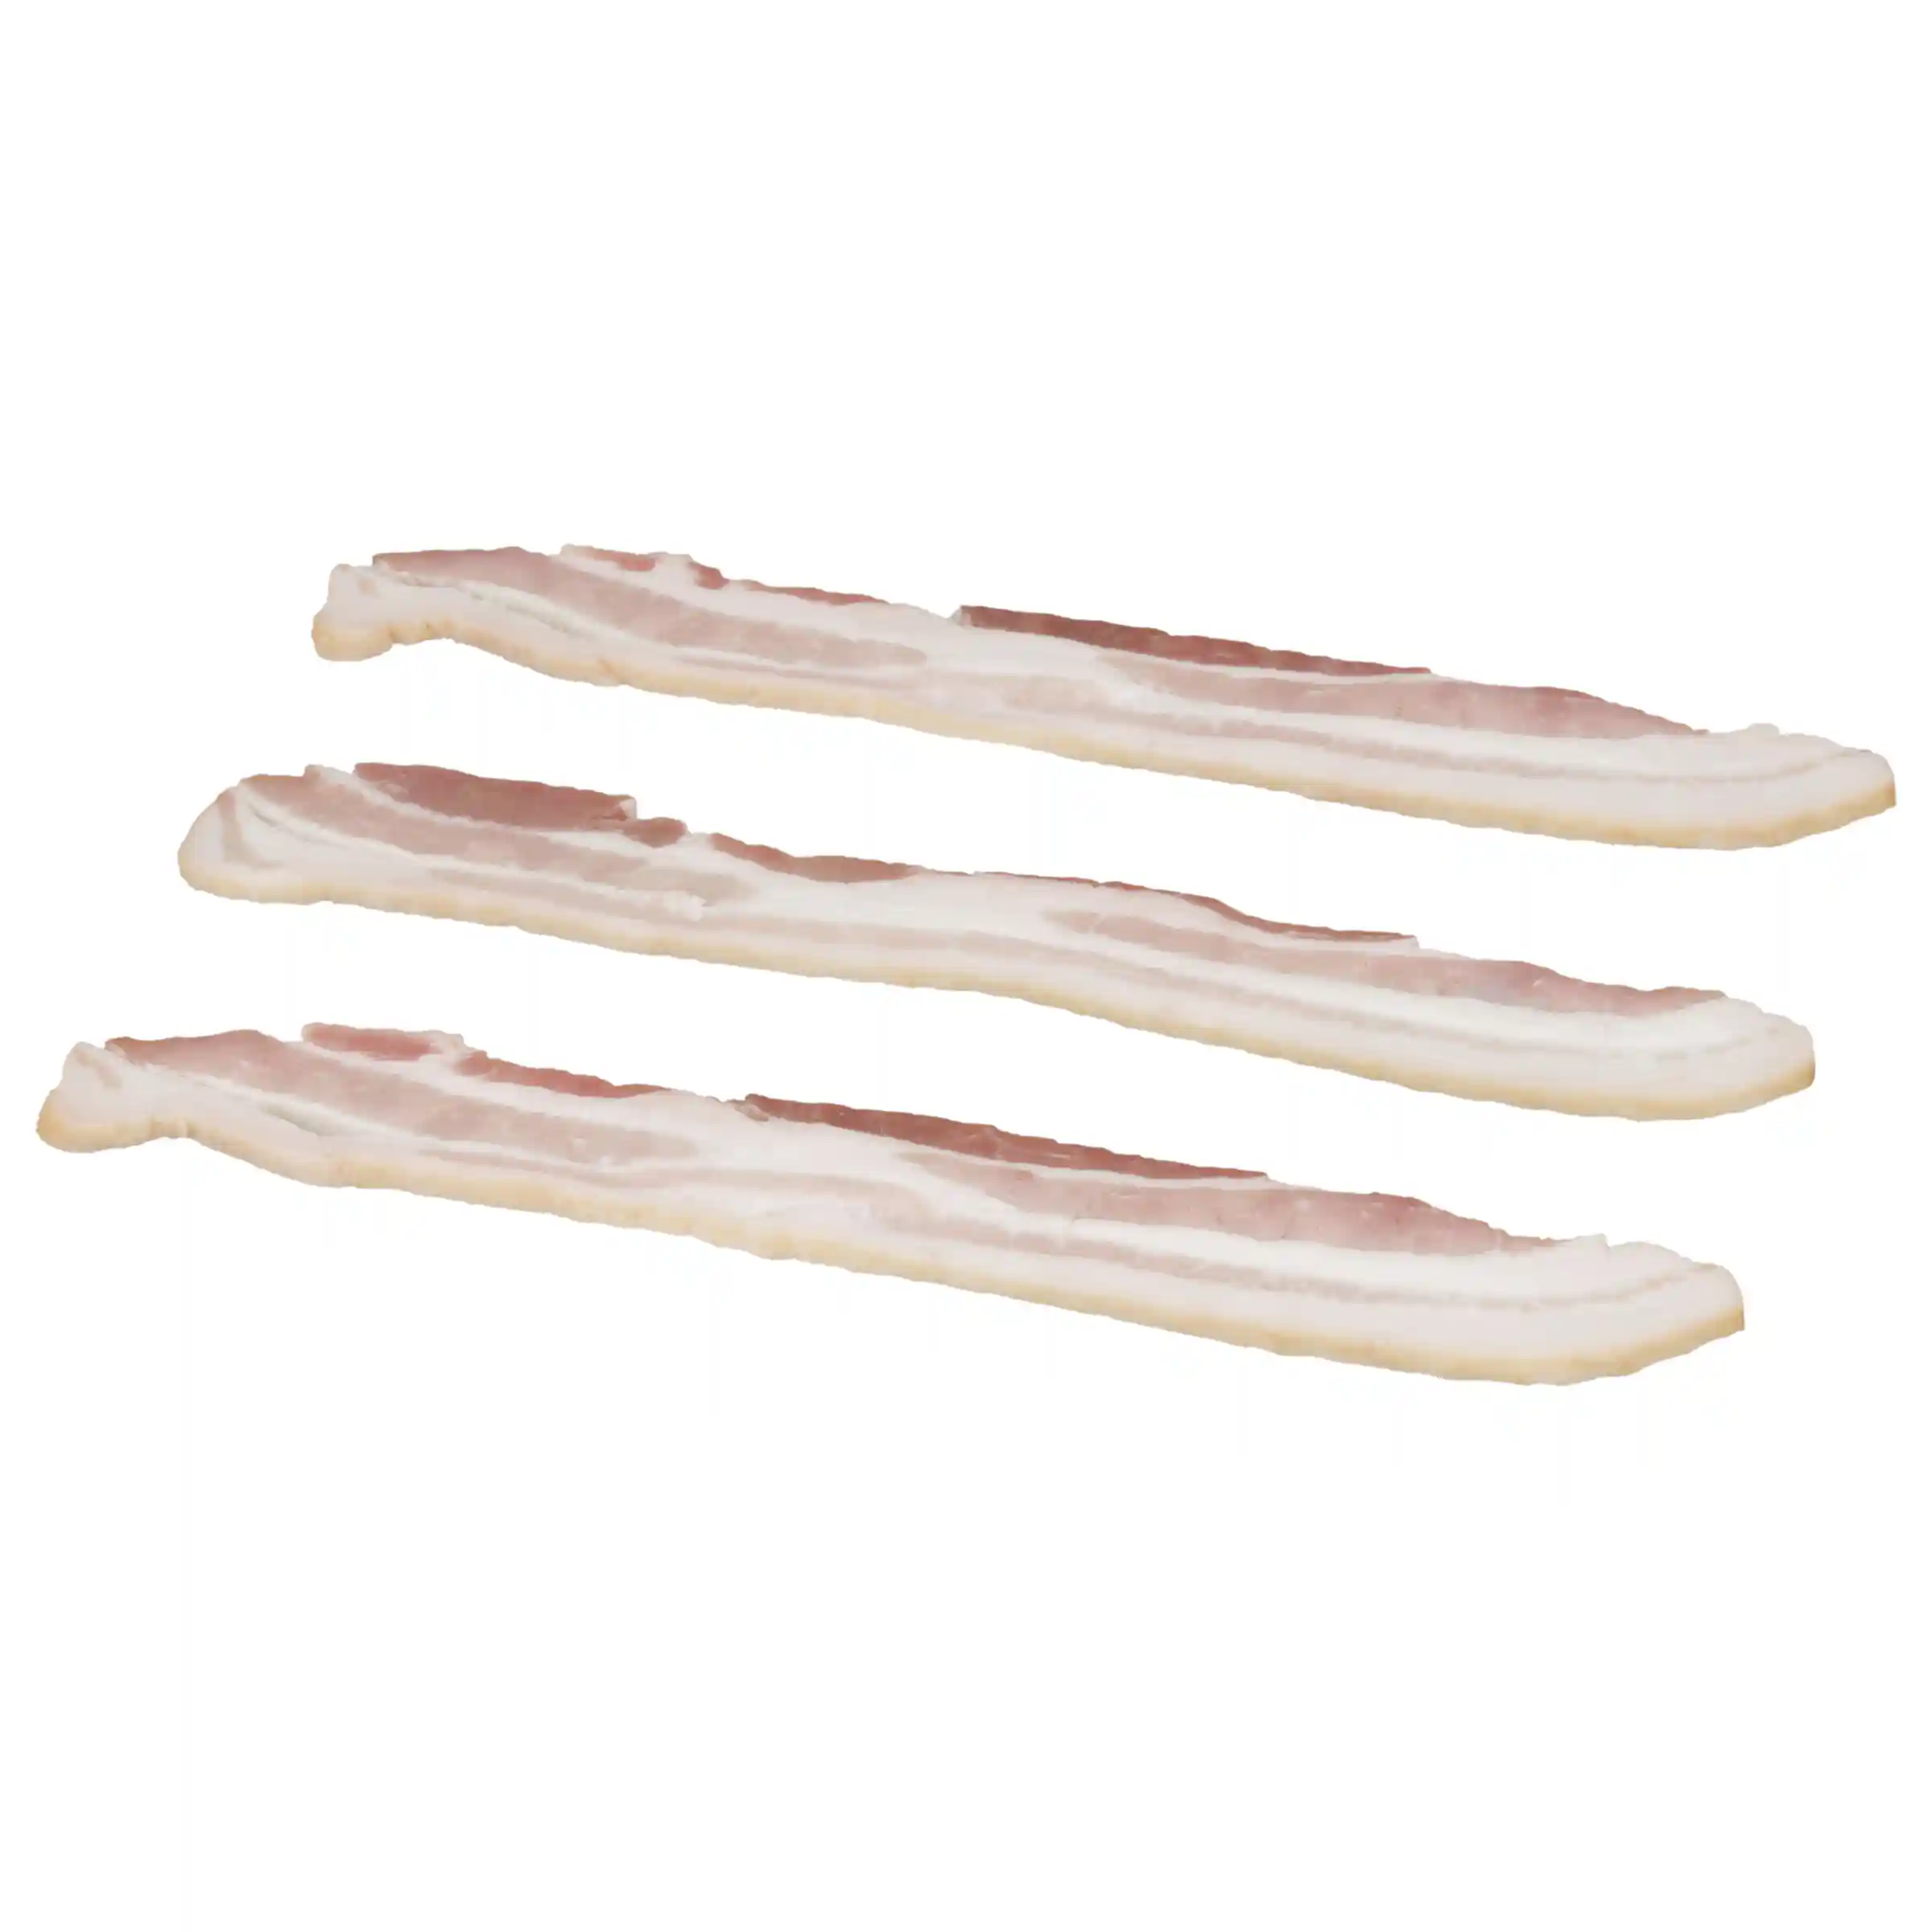 Wright® Brand Naturally Hickory Smoked Regular Sliced Bacon, Bulk, 30 Lbs, 6 Slices/Inch, Frozen_image_11